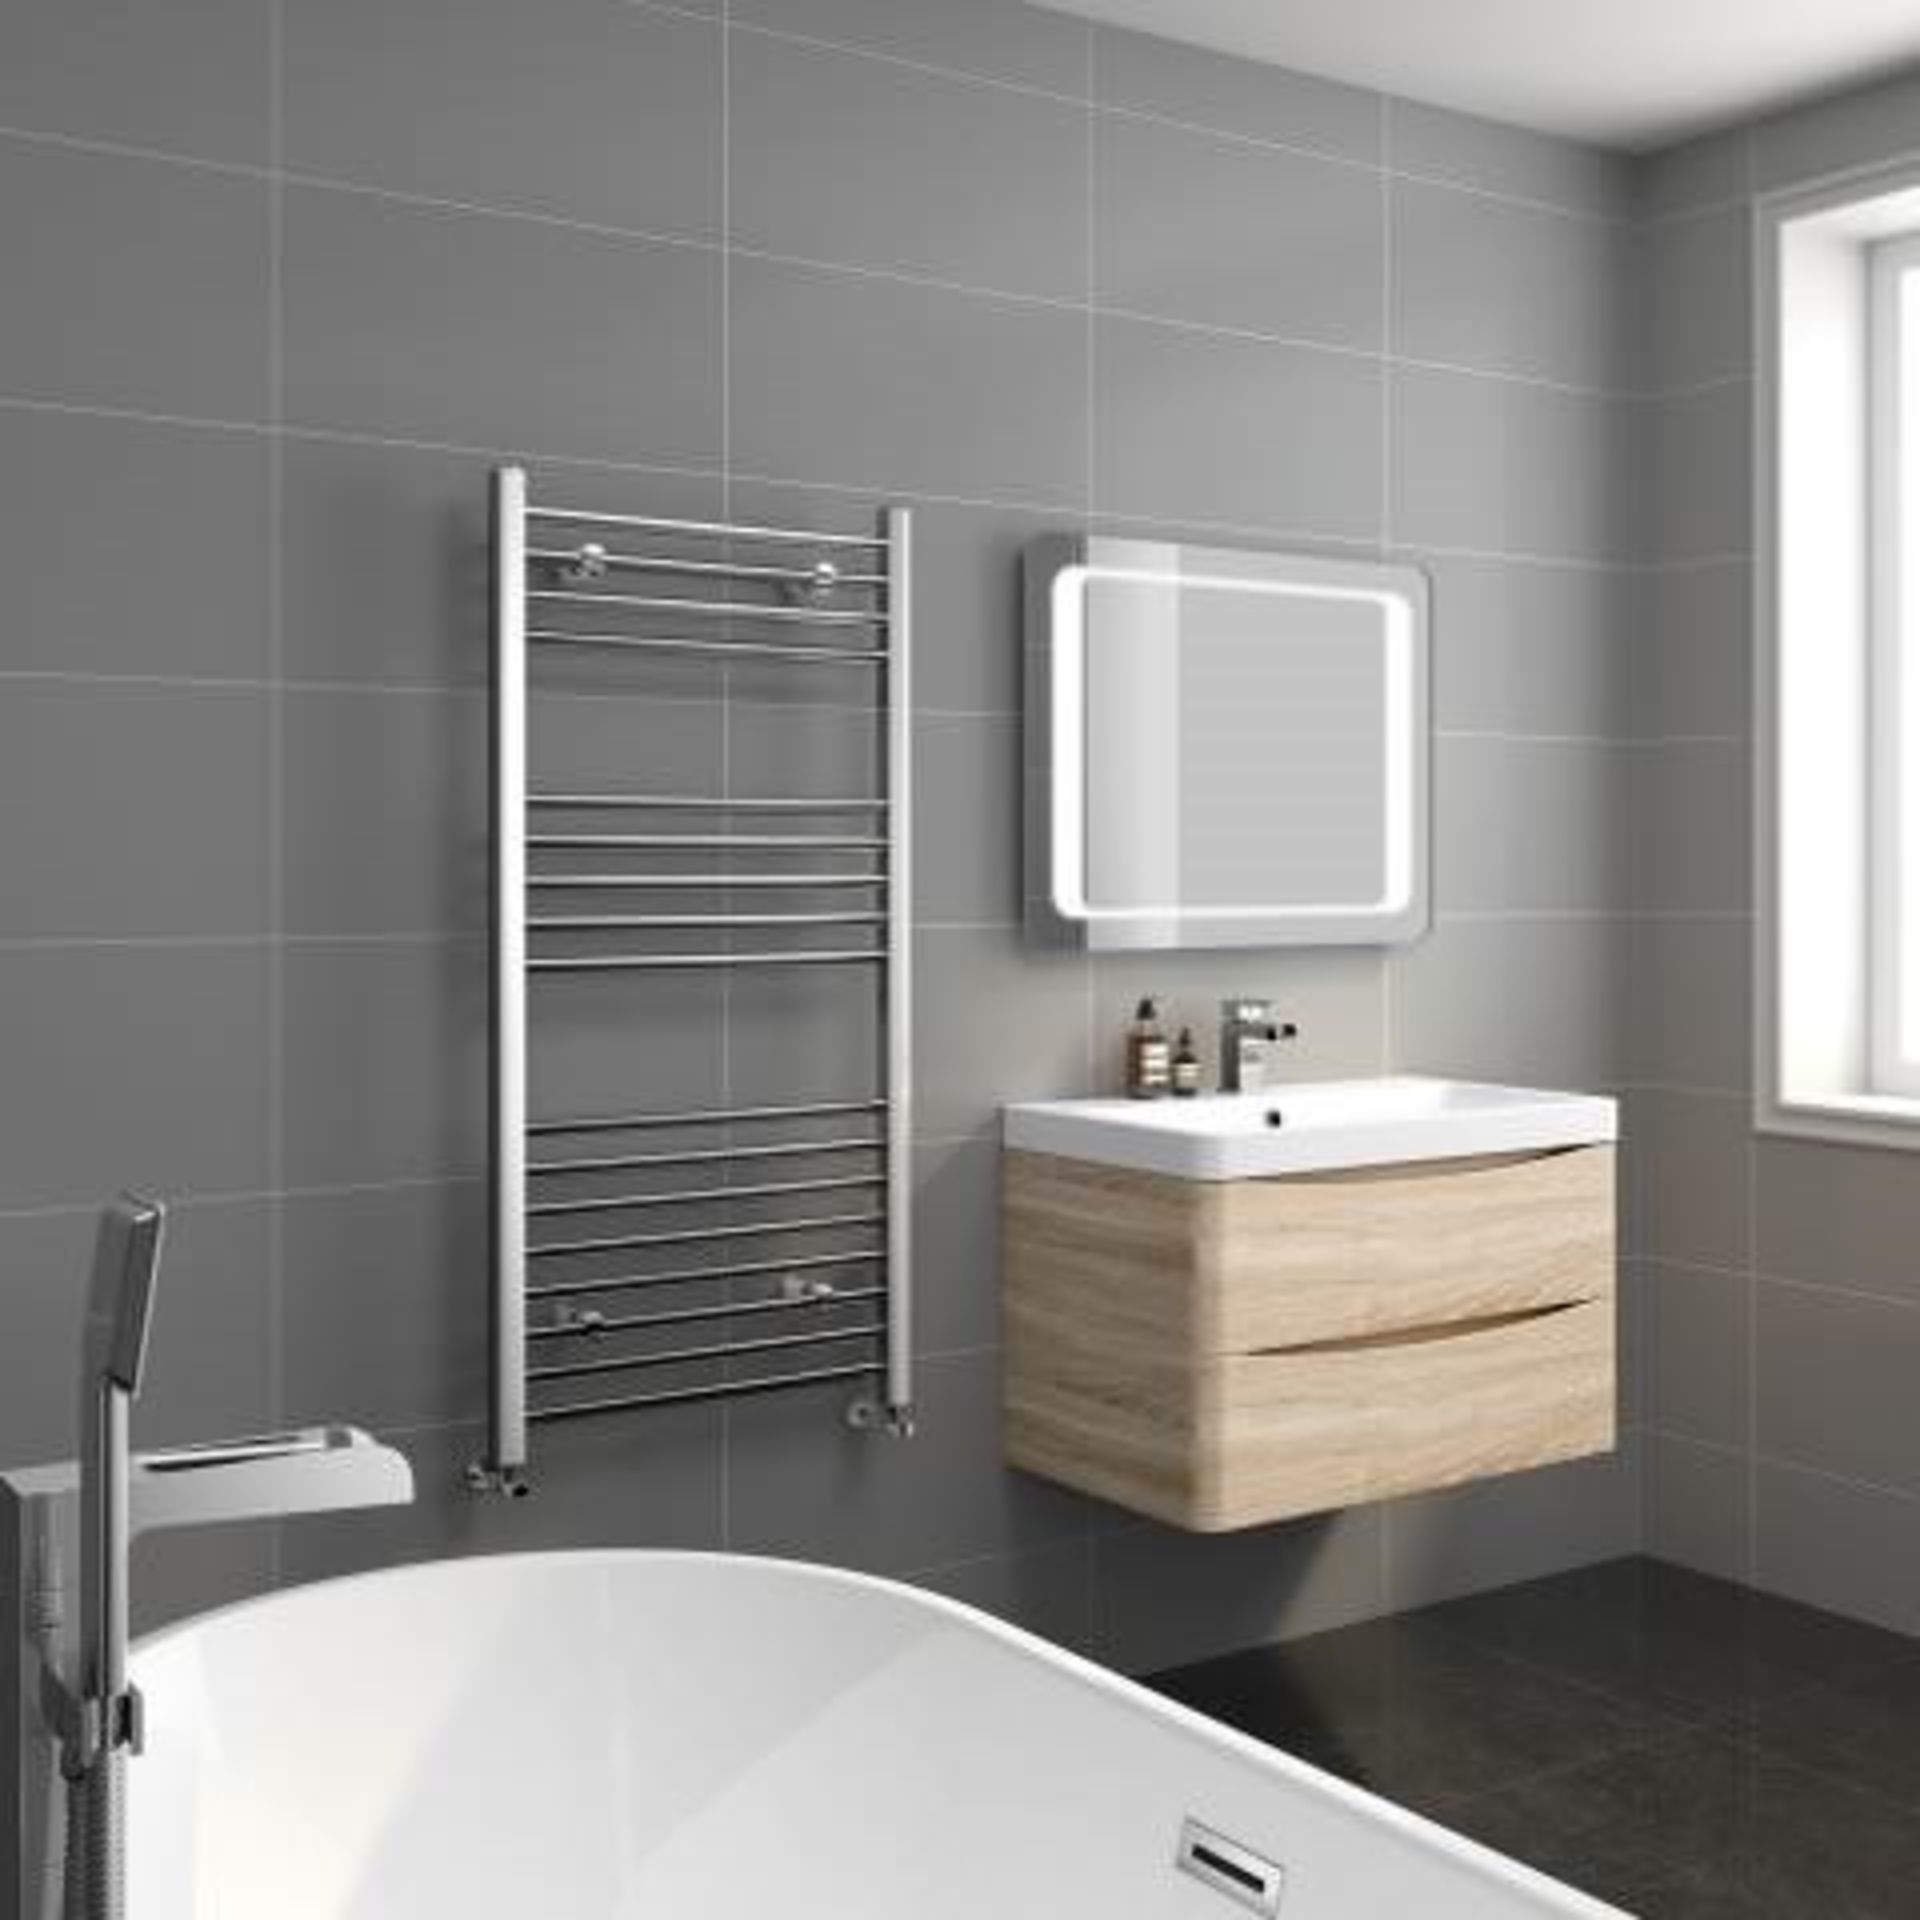 BRAND NEW BOXED 1200x600mm - 20mm Tubes - Chrome Heated Straight Rail Ladder Towel Radiator. R... - Image 2 of 4